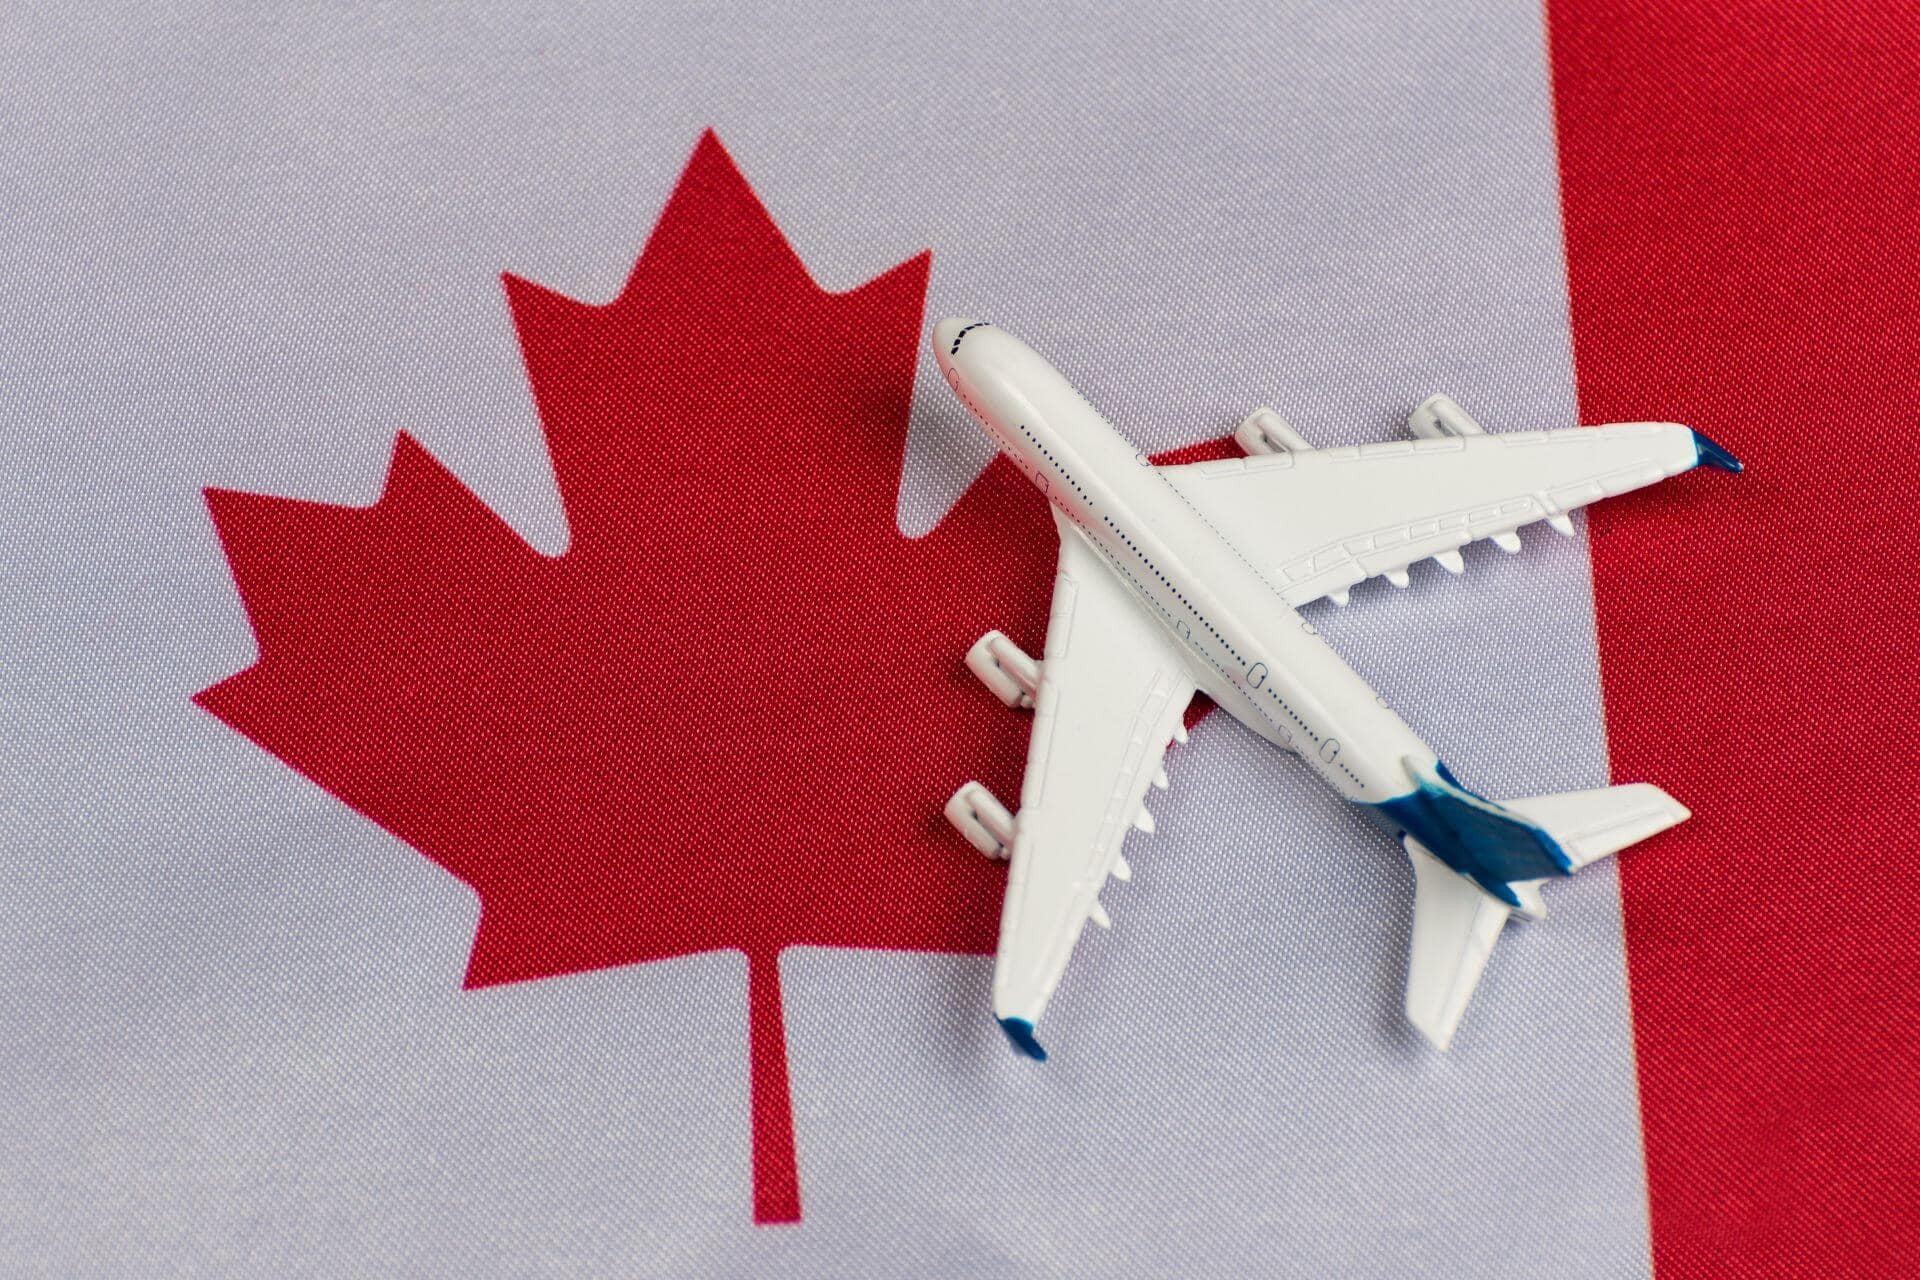 Canada Immigrants in 2022 Canada Traveller Canada Travel Canada New Immigration Fee Structure IRCC resumed Express Entry program draws on July 6th, 2022 for all programs. To all Express Entry applicants, they sent out an email about an Upfront Immigration Medical Examination. Covid-19 testing